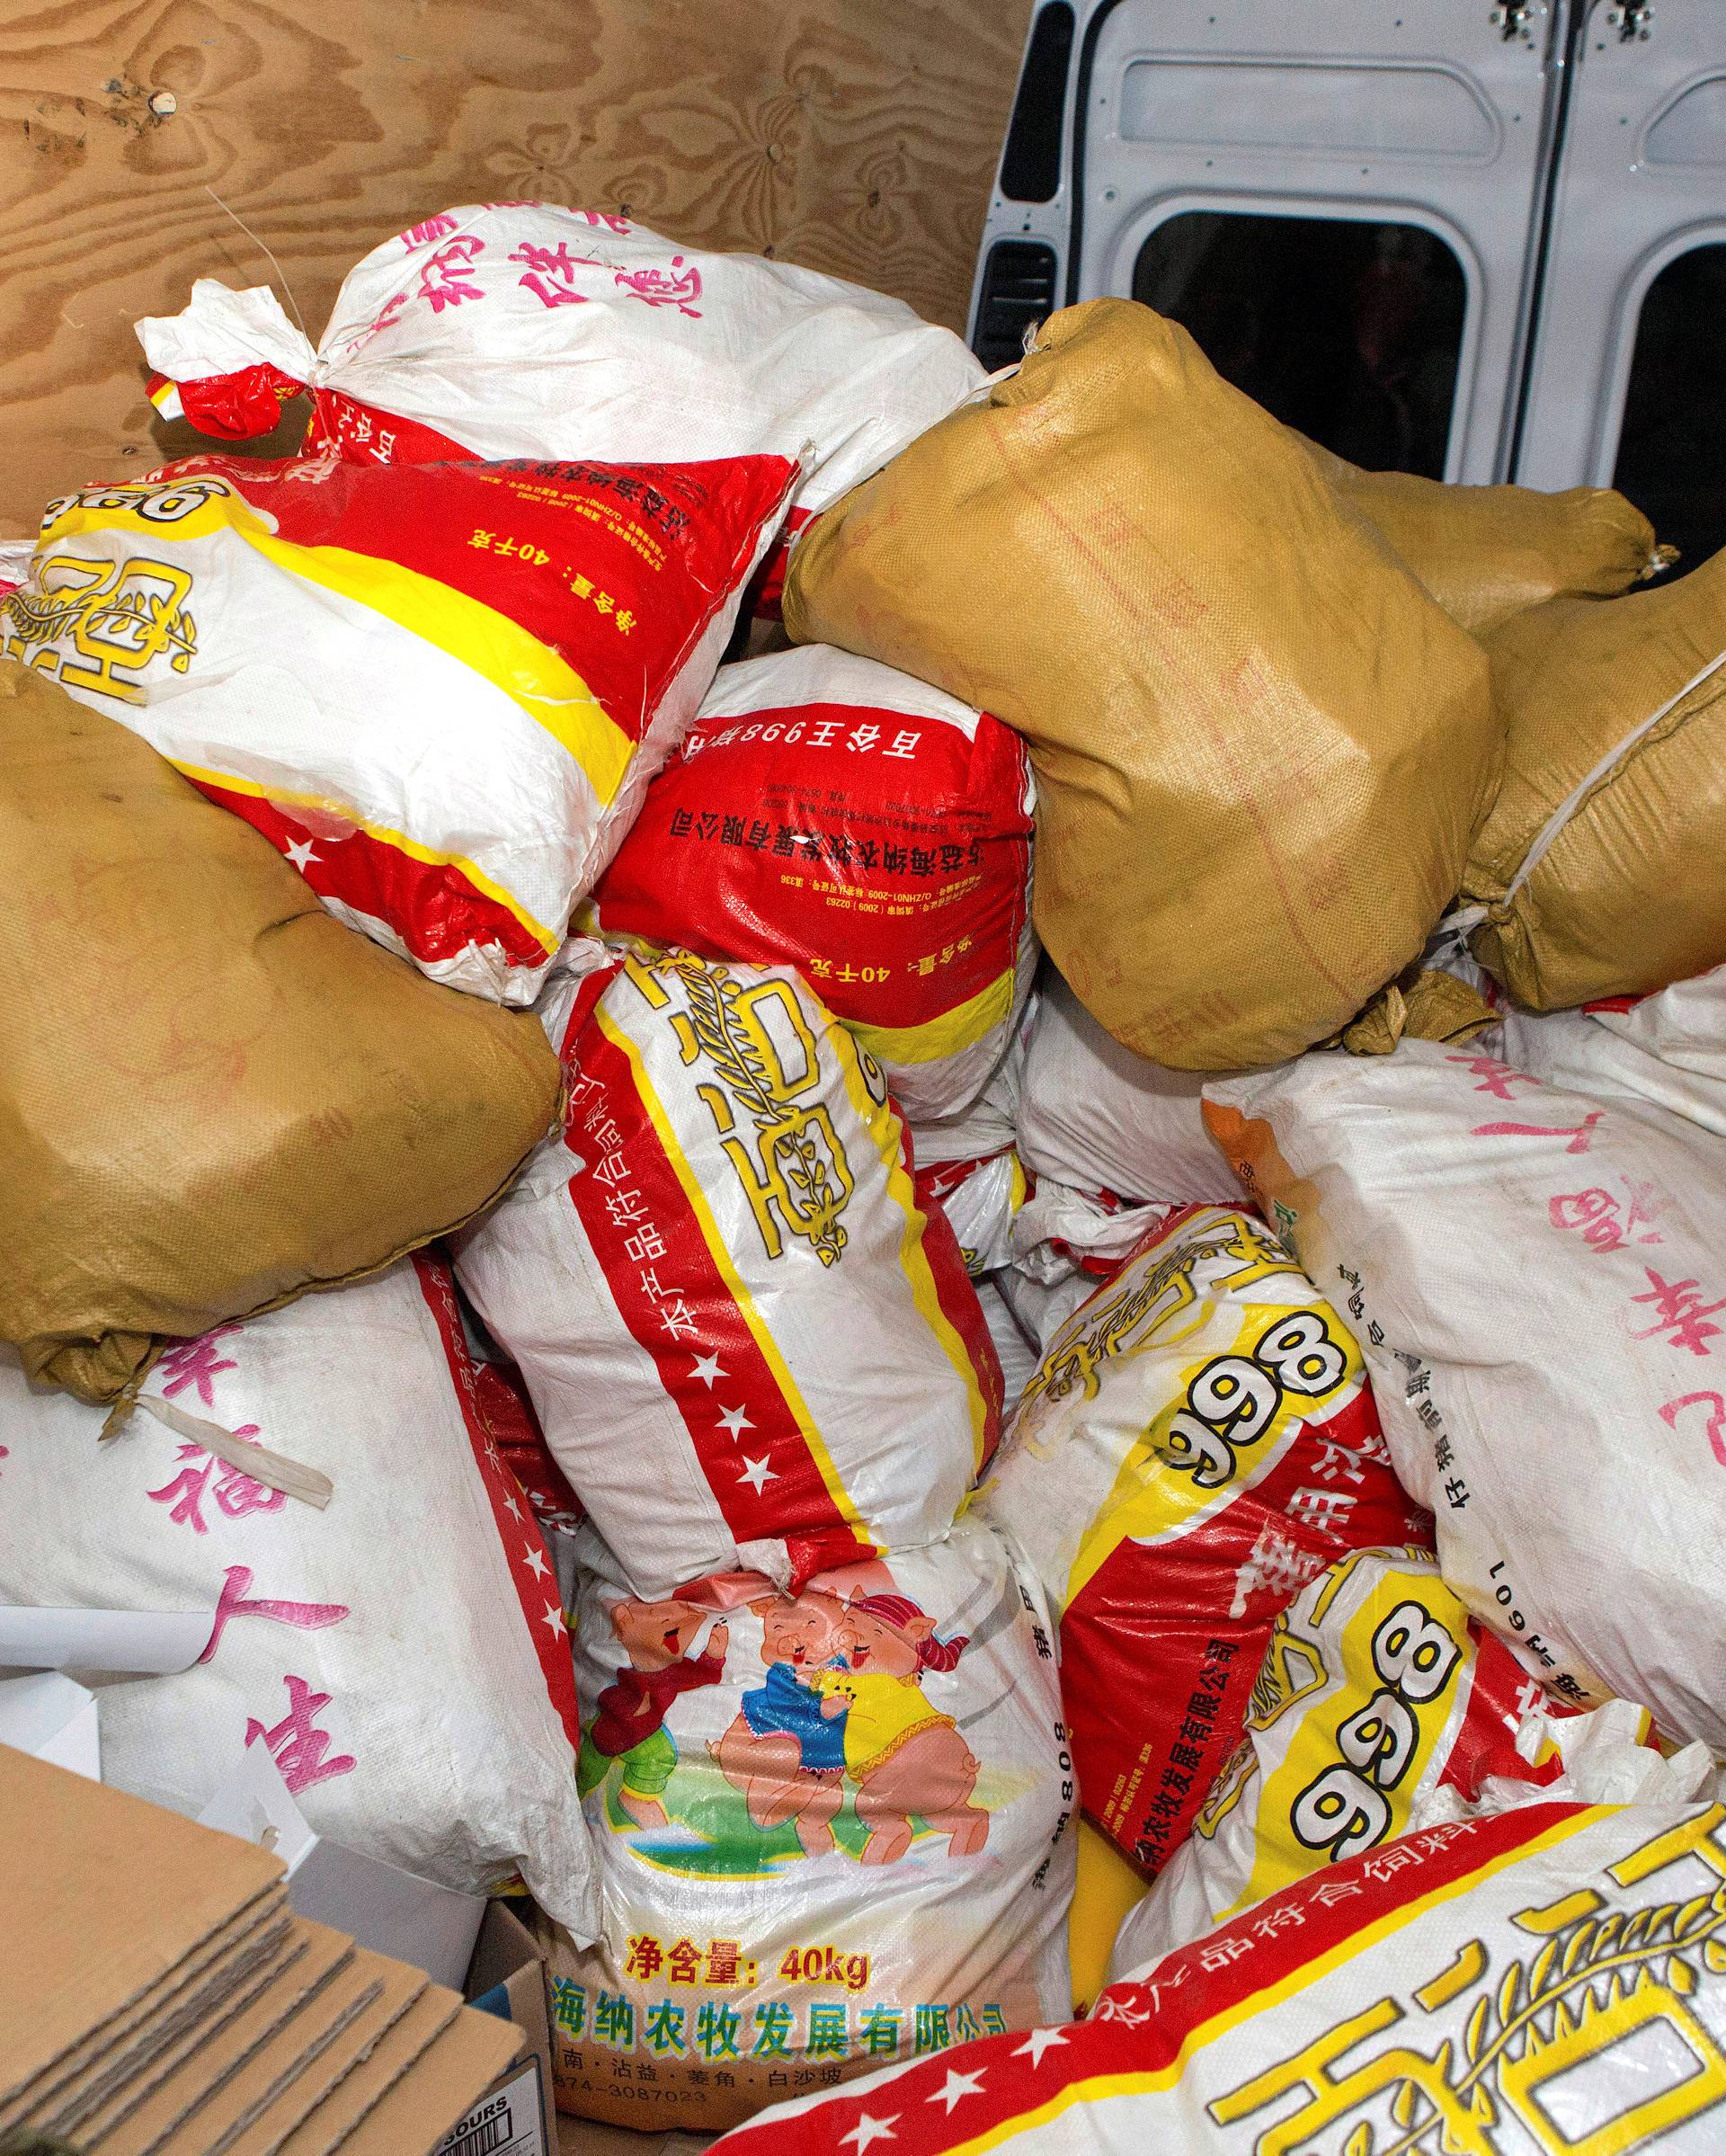 A supplied image from the Australian Federal Police shows the alleged record haul of 1.2 tonnes of methamphetamine that was seized at the Port of Geraldton, located north of the city of Perth